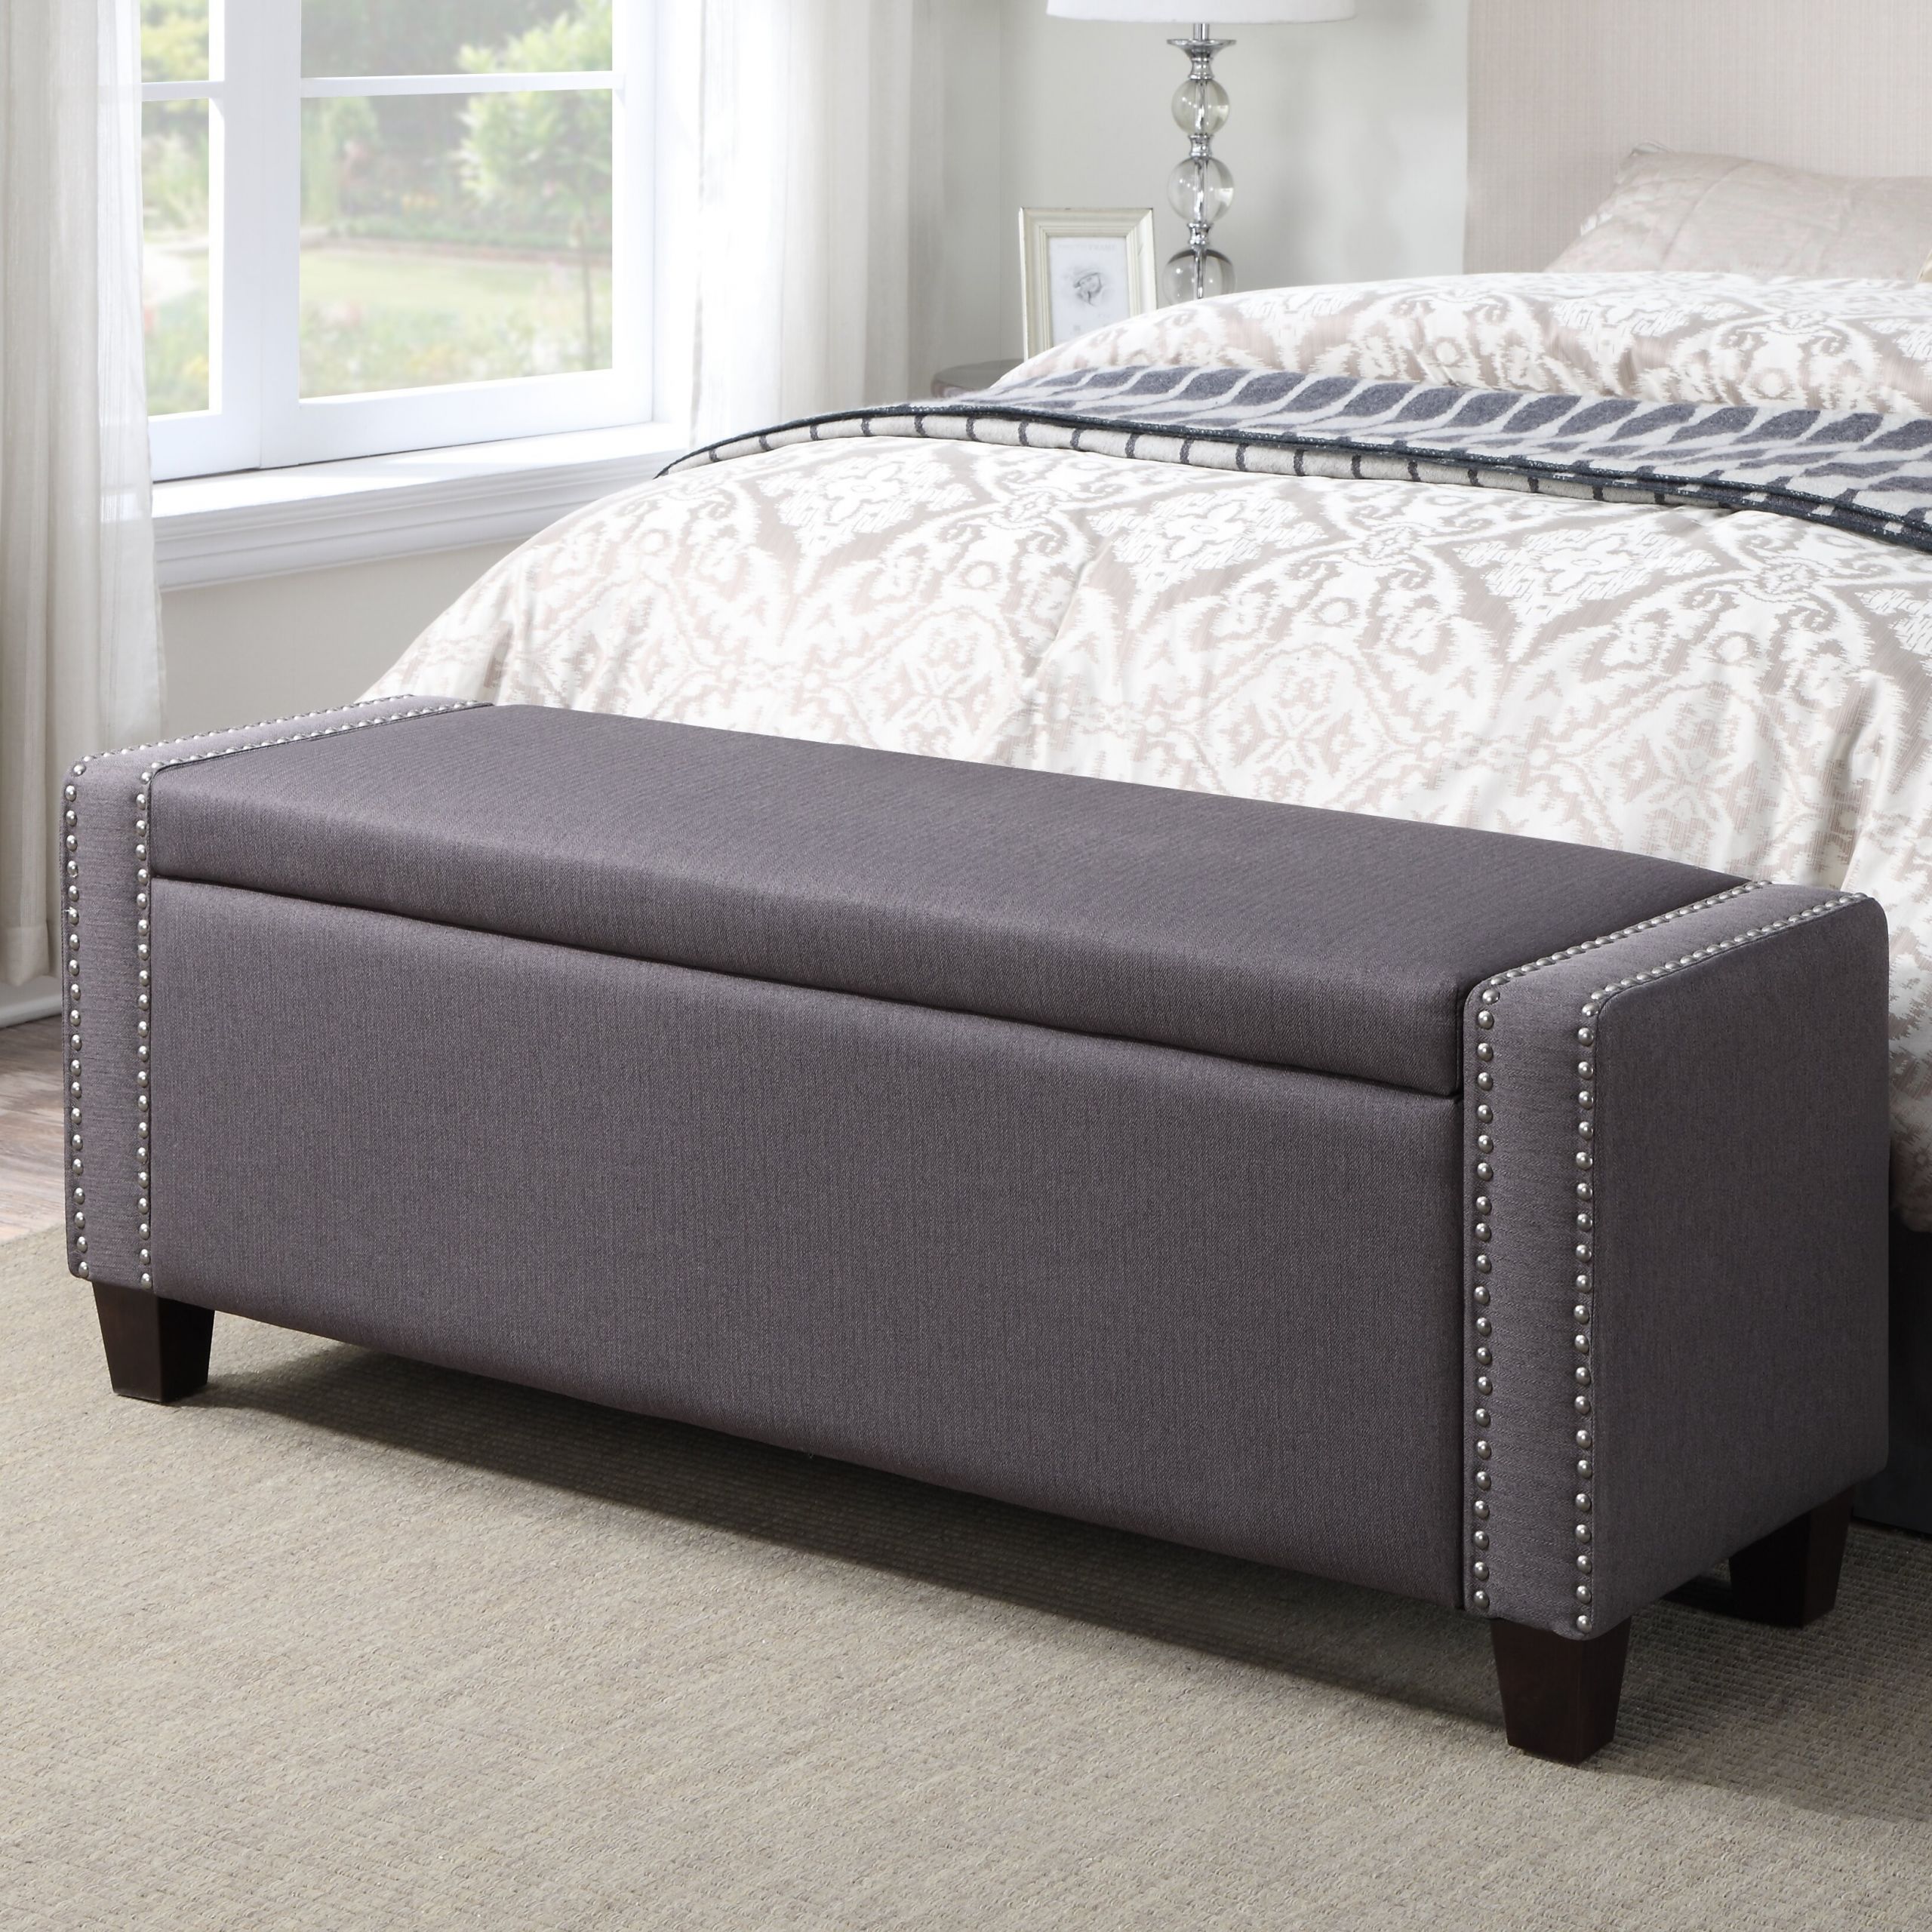 Why Every Bedroom Needs A Storage Bench